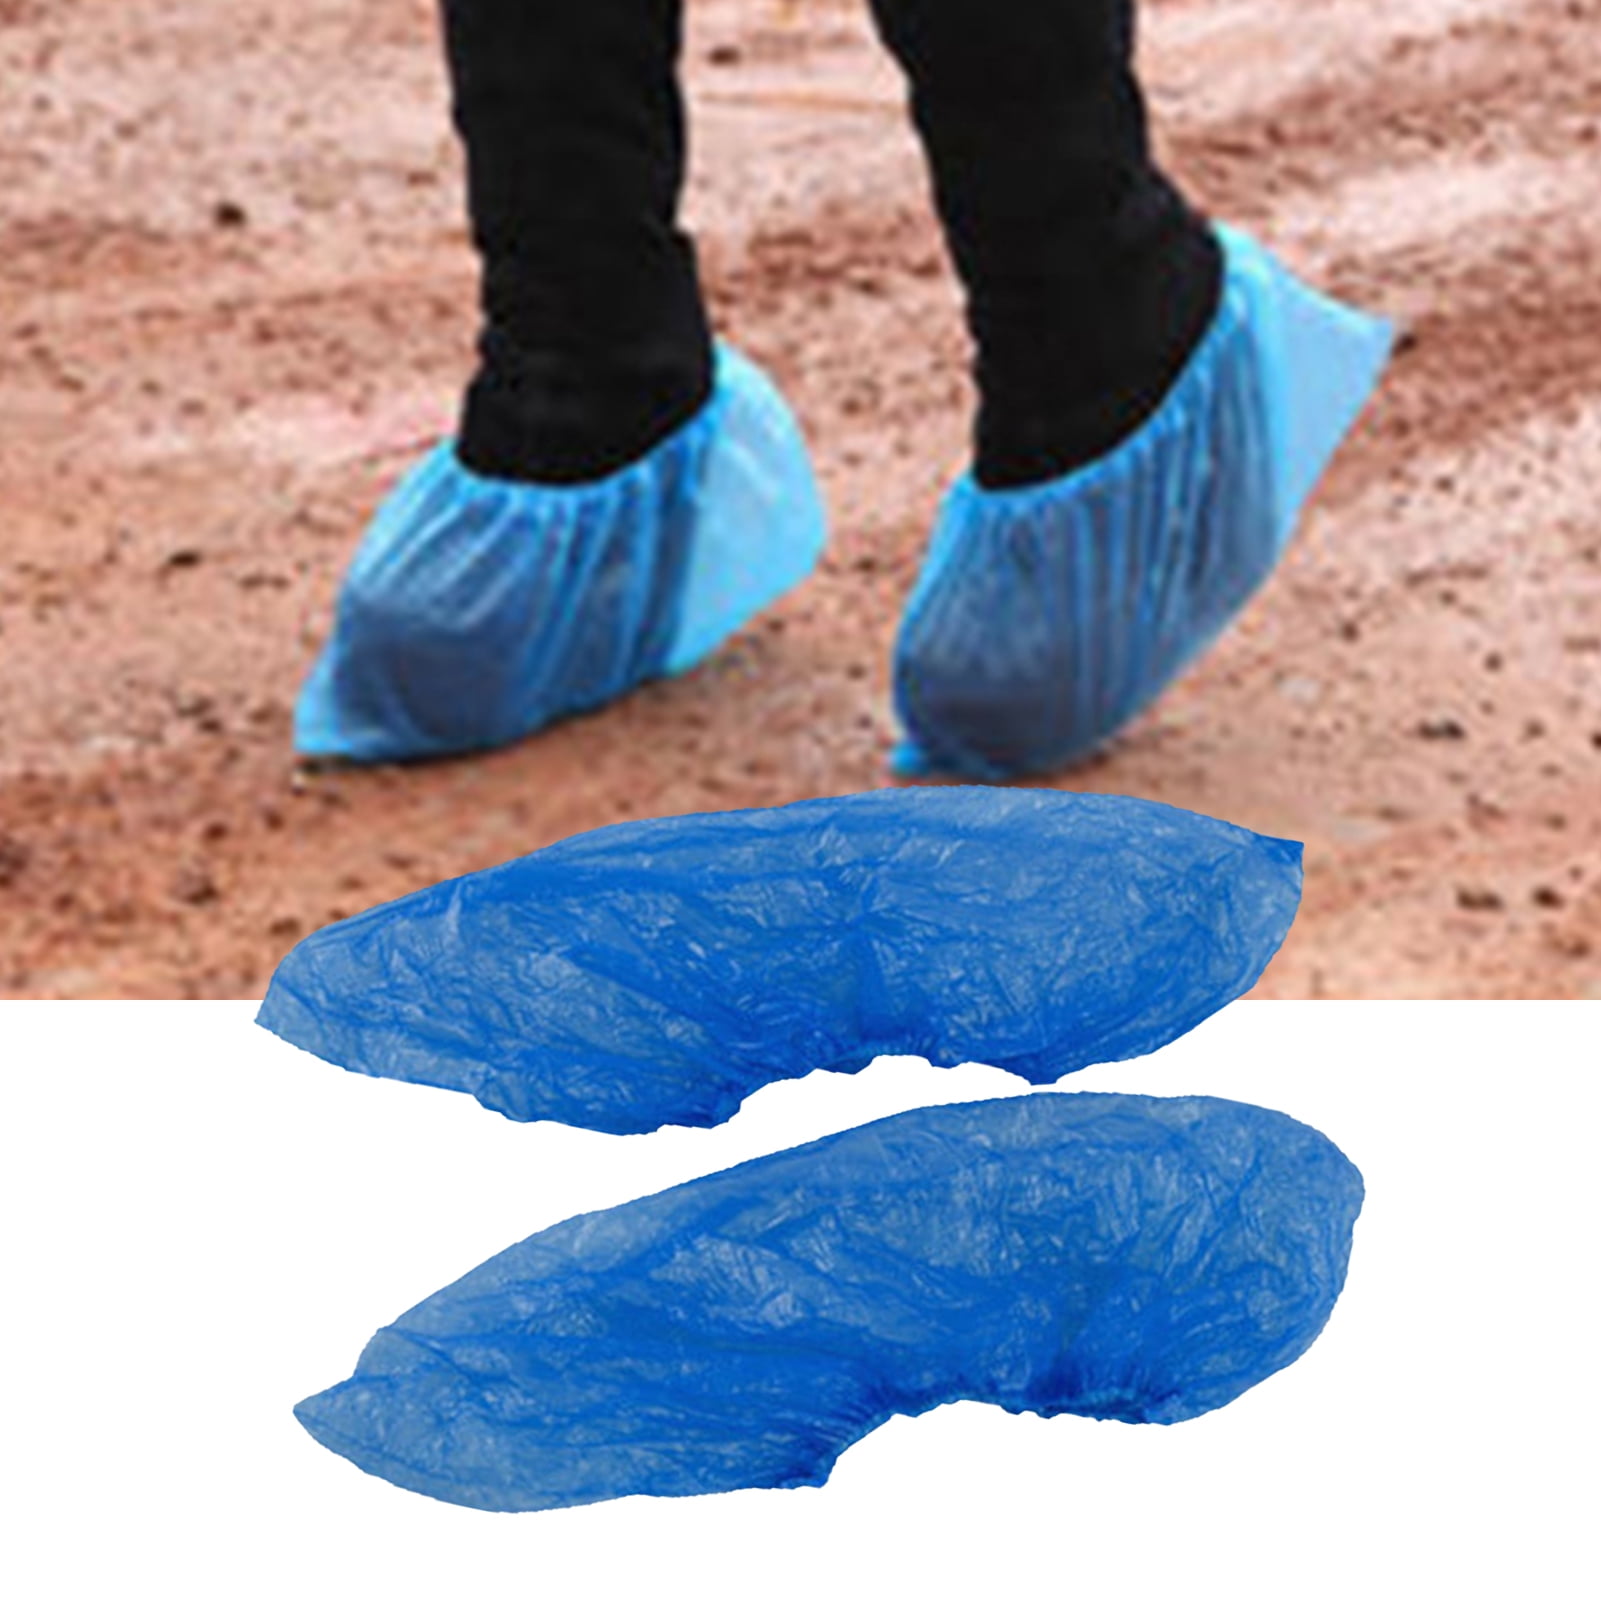 Waterproof Boot Covers Disposable Shoe Cover Elastic Protect Overshoes Universal 